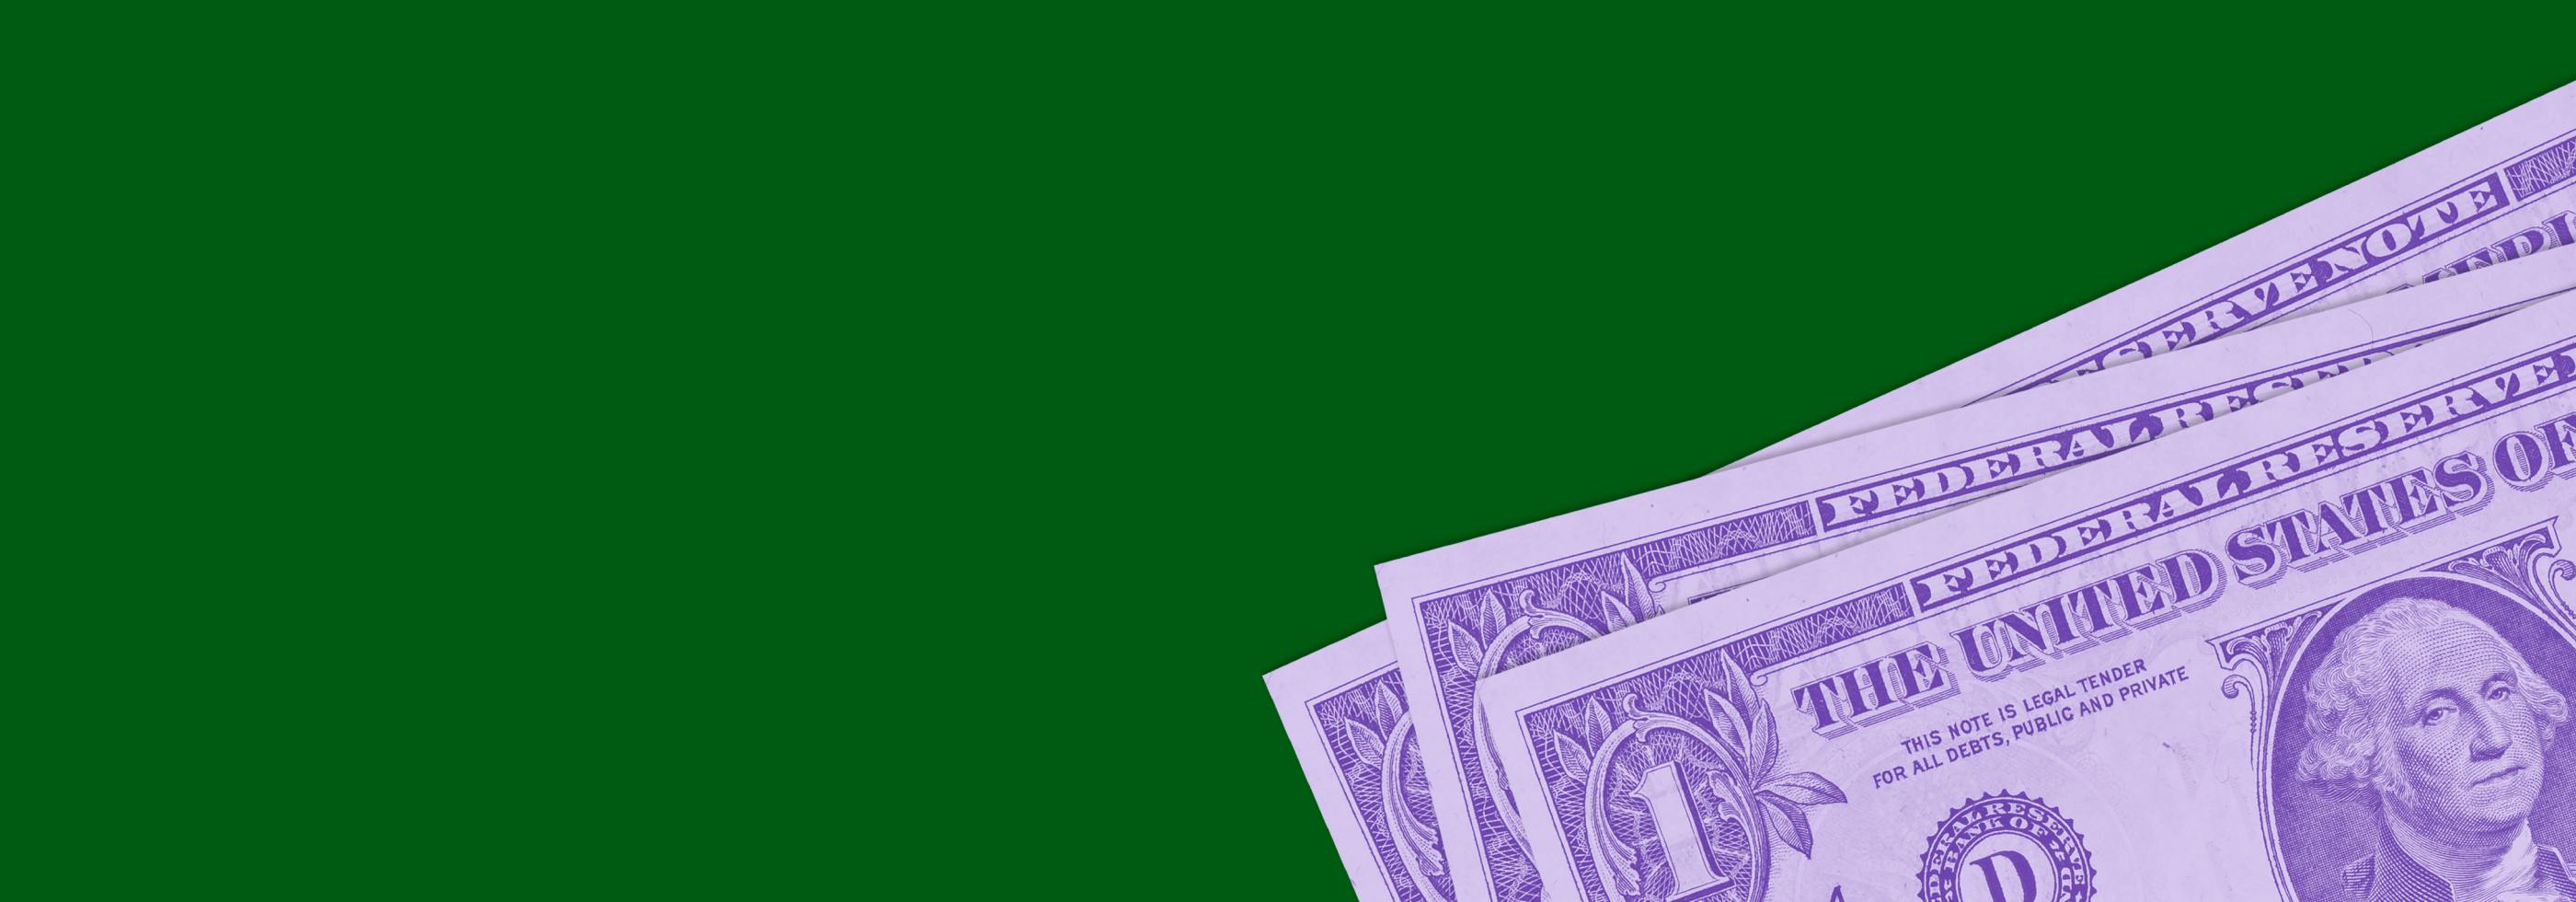 Dollars on green background.